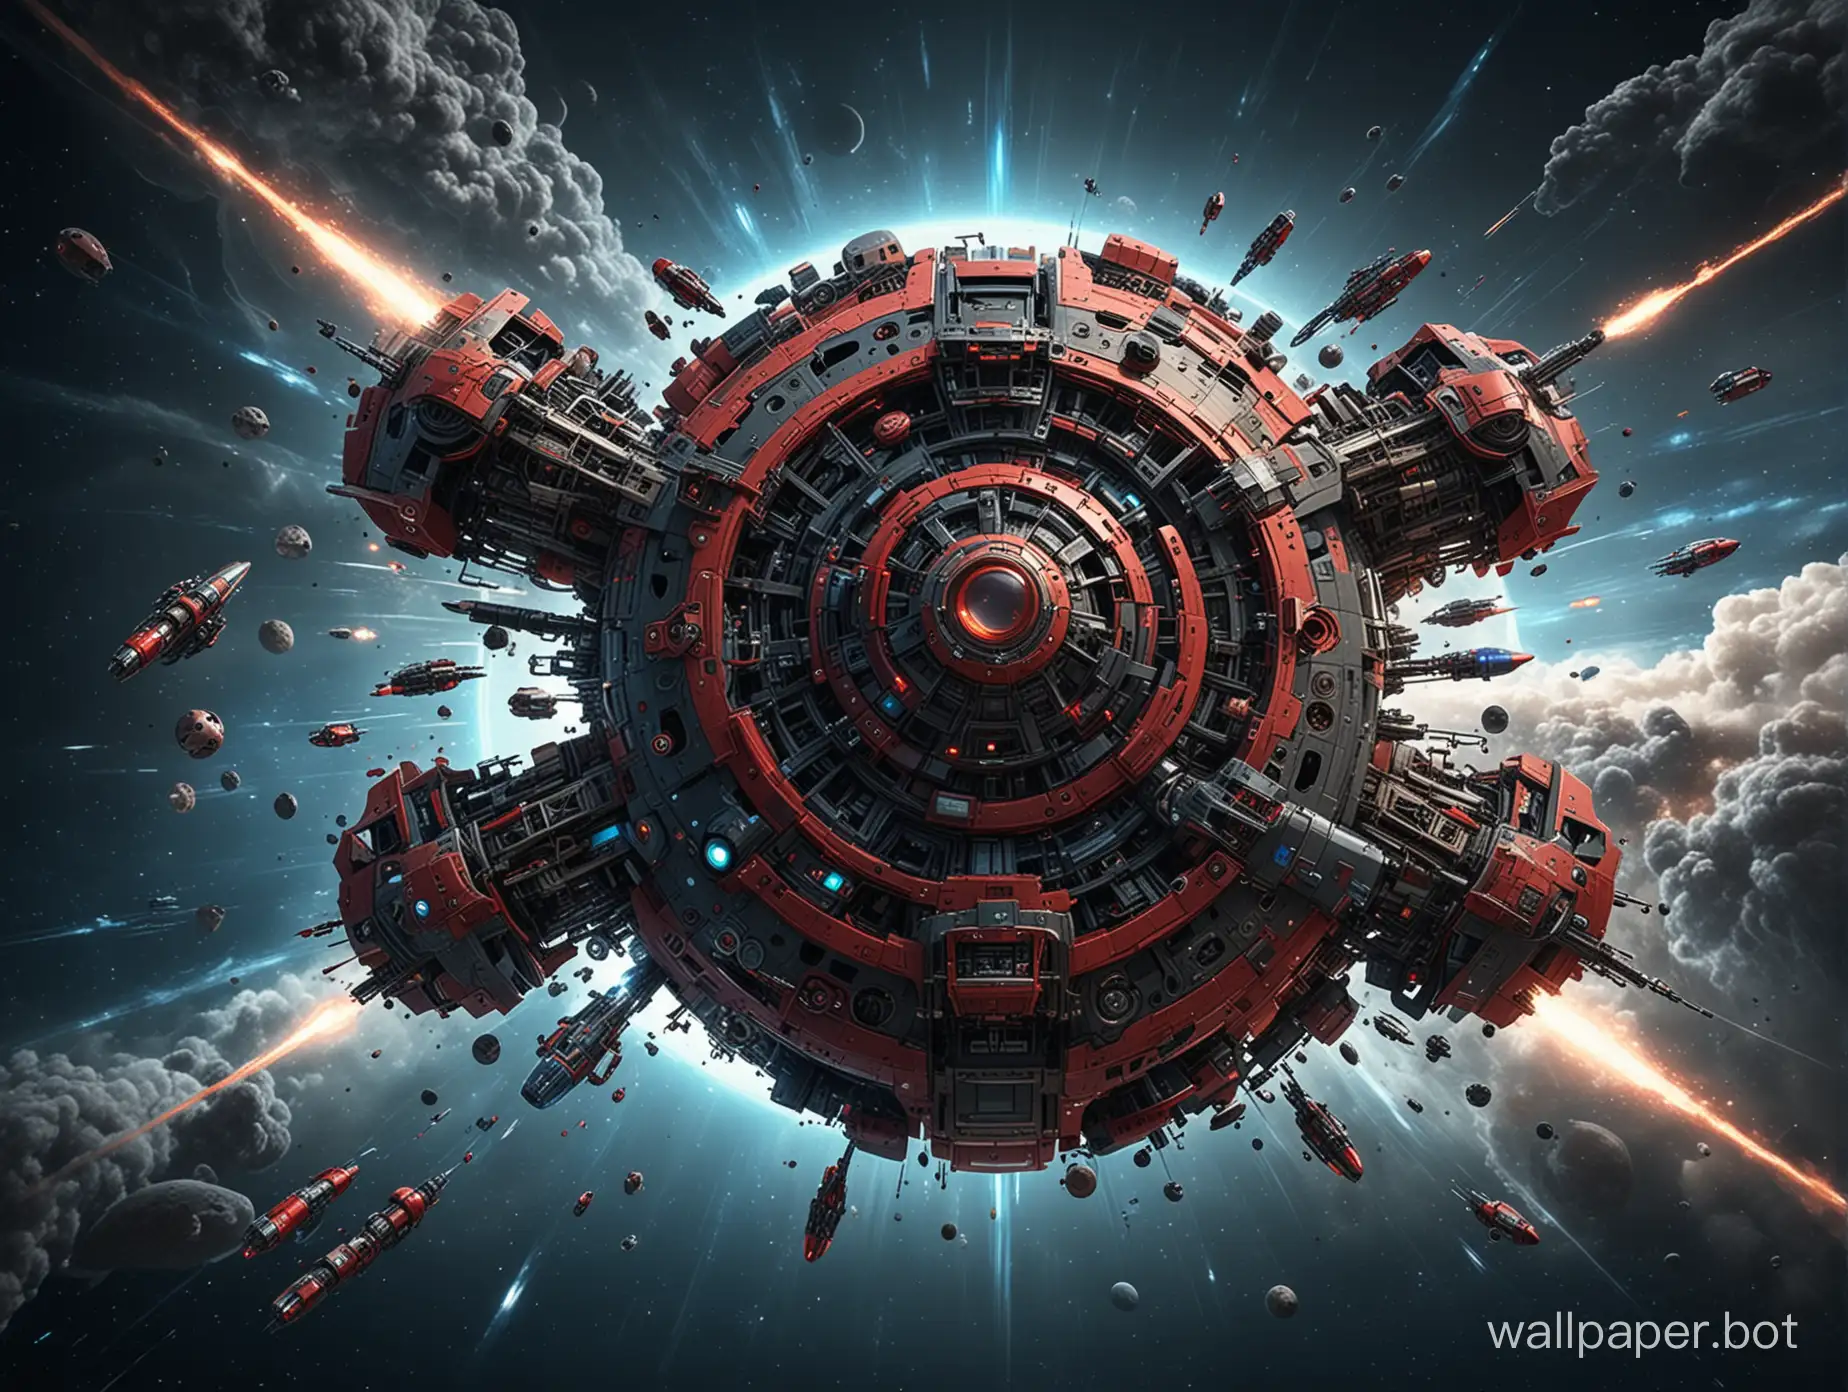 Interstellar-Battle-Amid-Collapsing-Planets-and-Steampunk-Ships